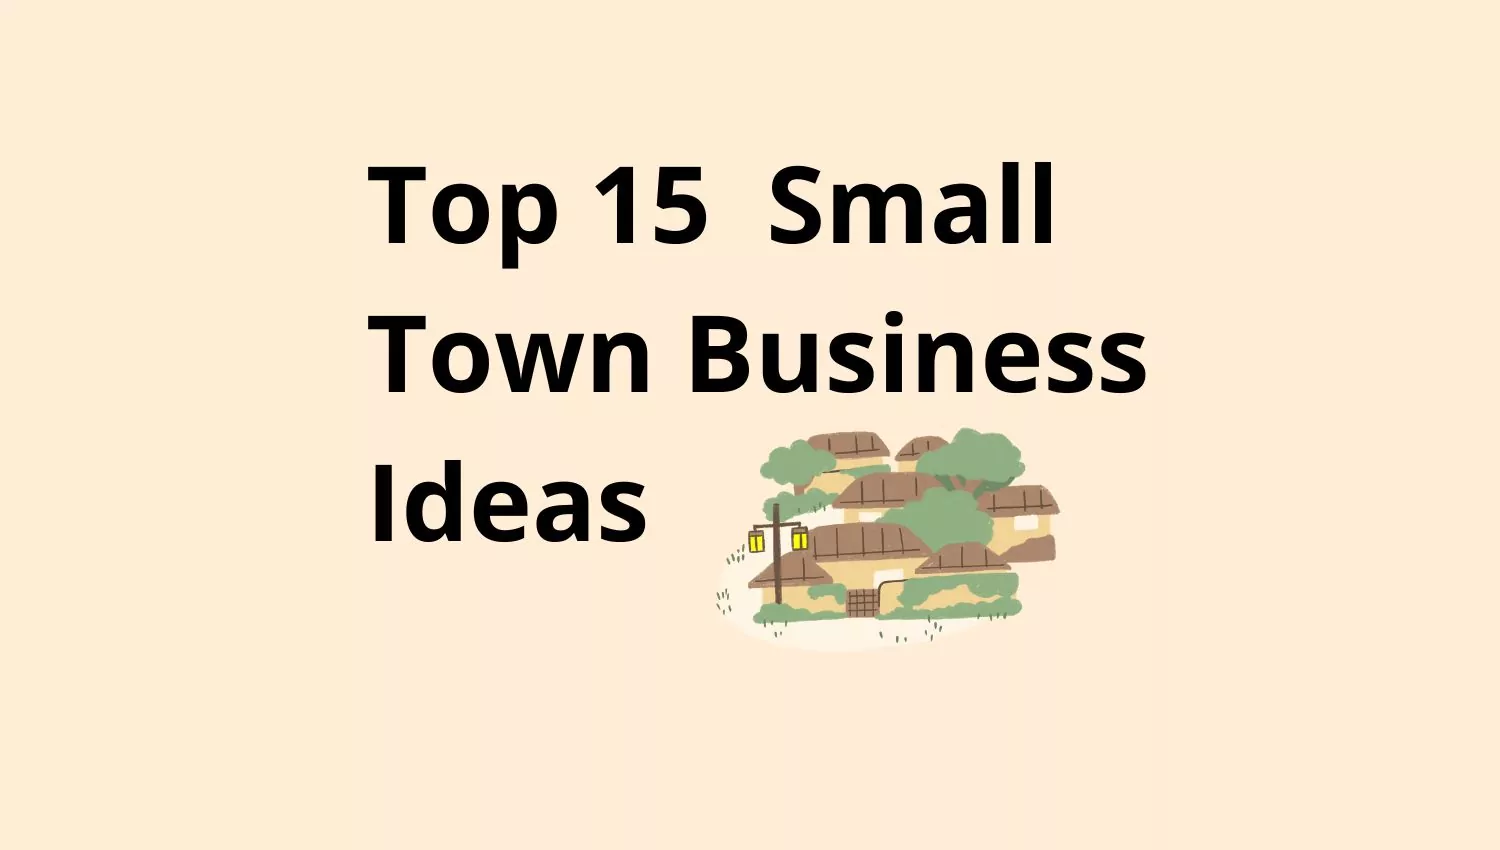 Top 15 Small Town Business Ideas